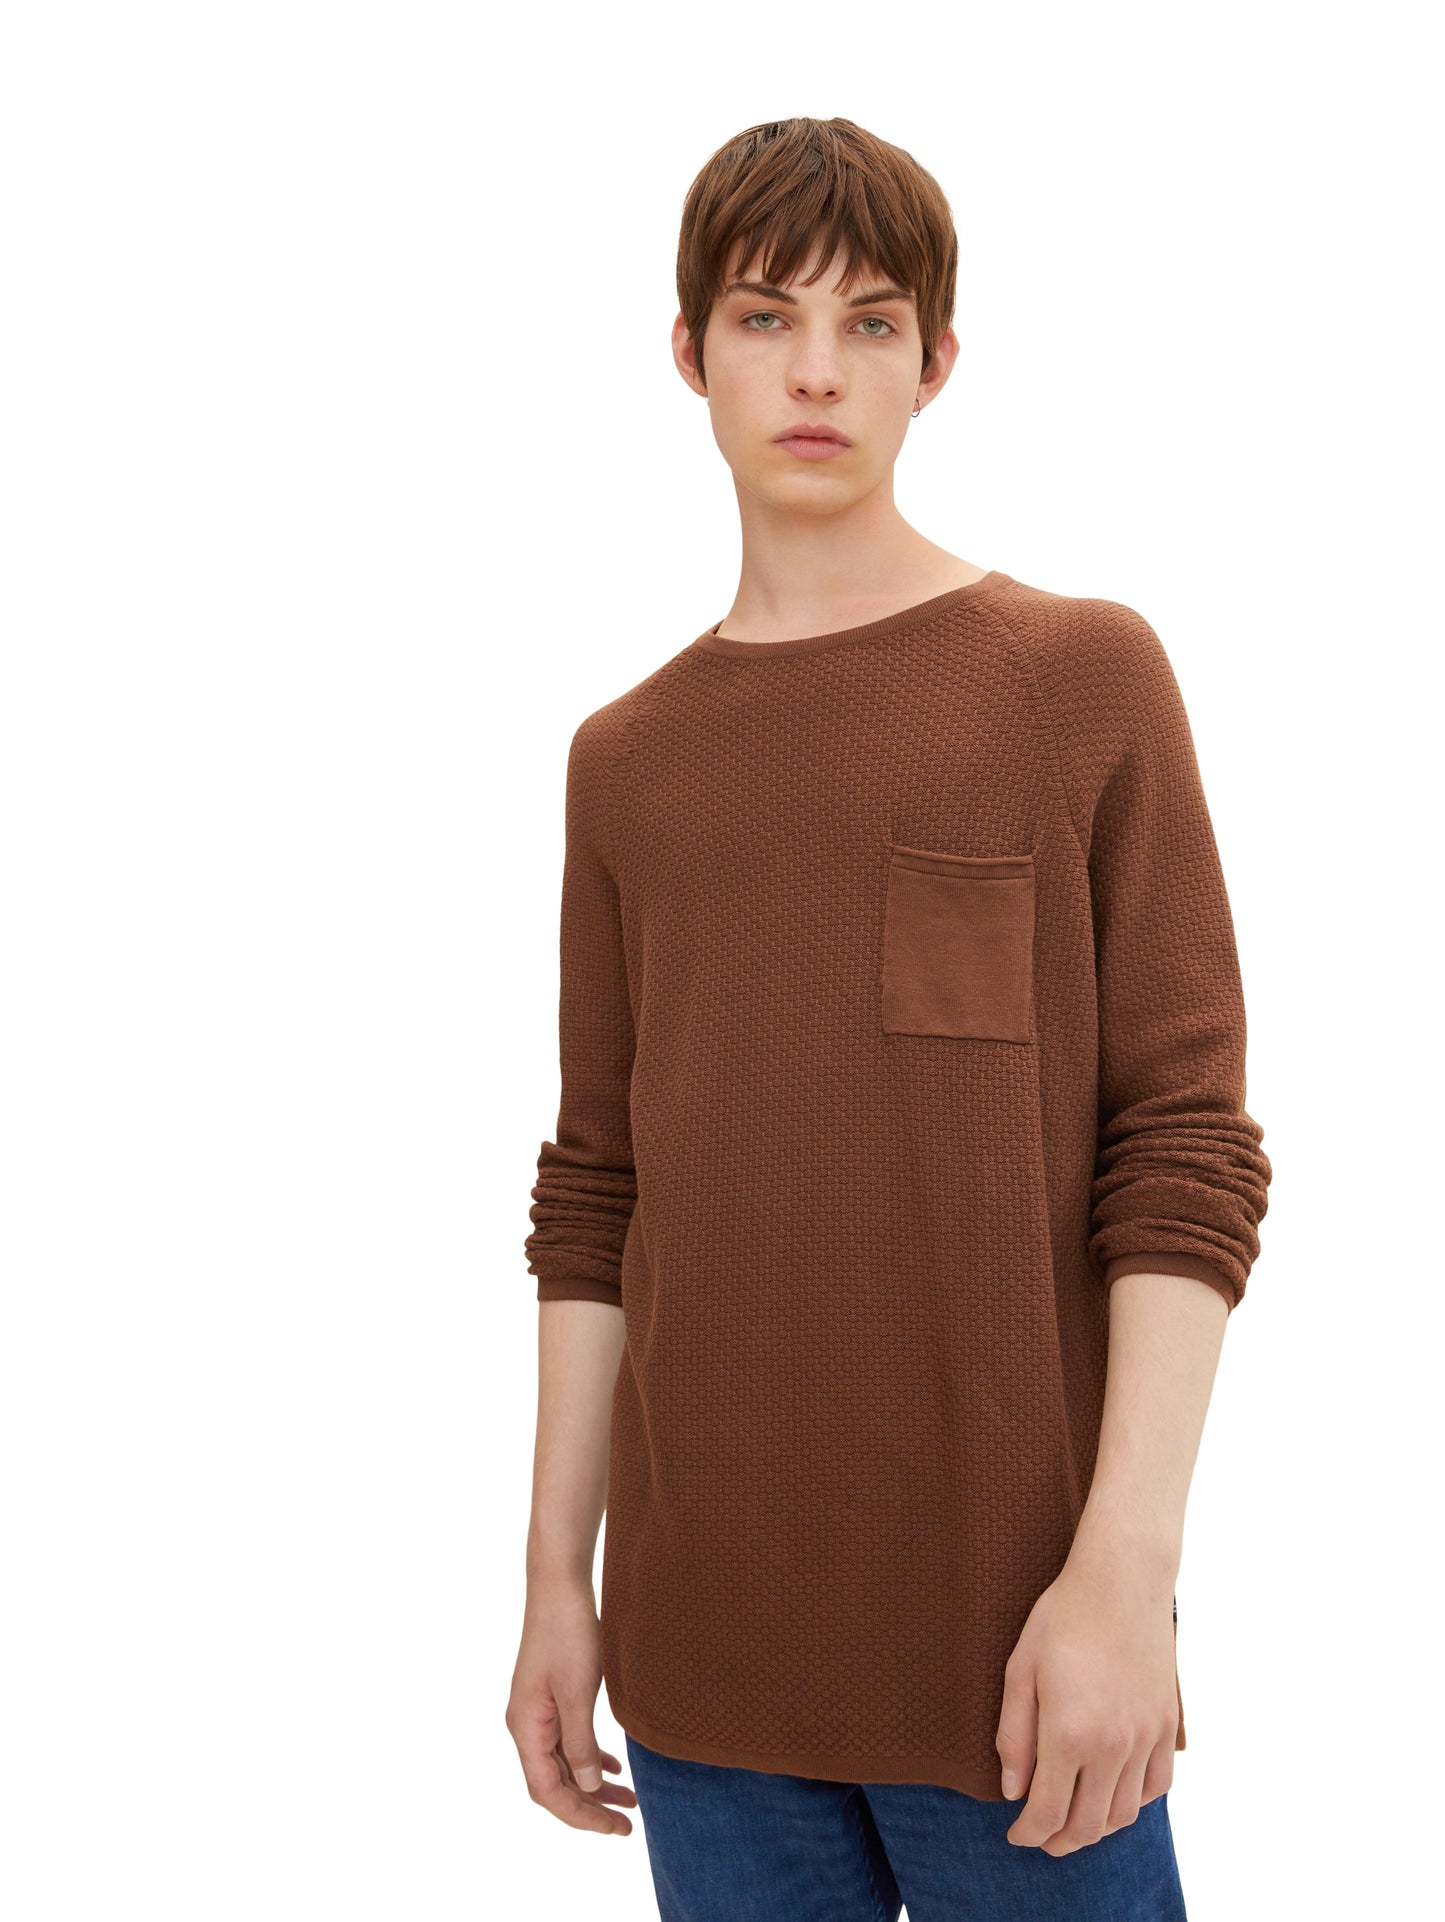 structured knit pullover (Light Wood Bro)